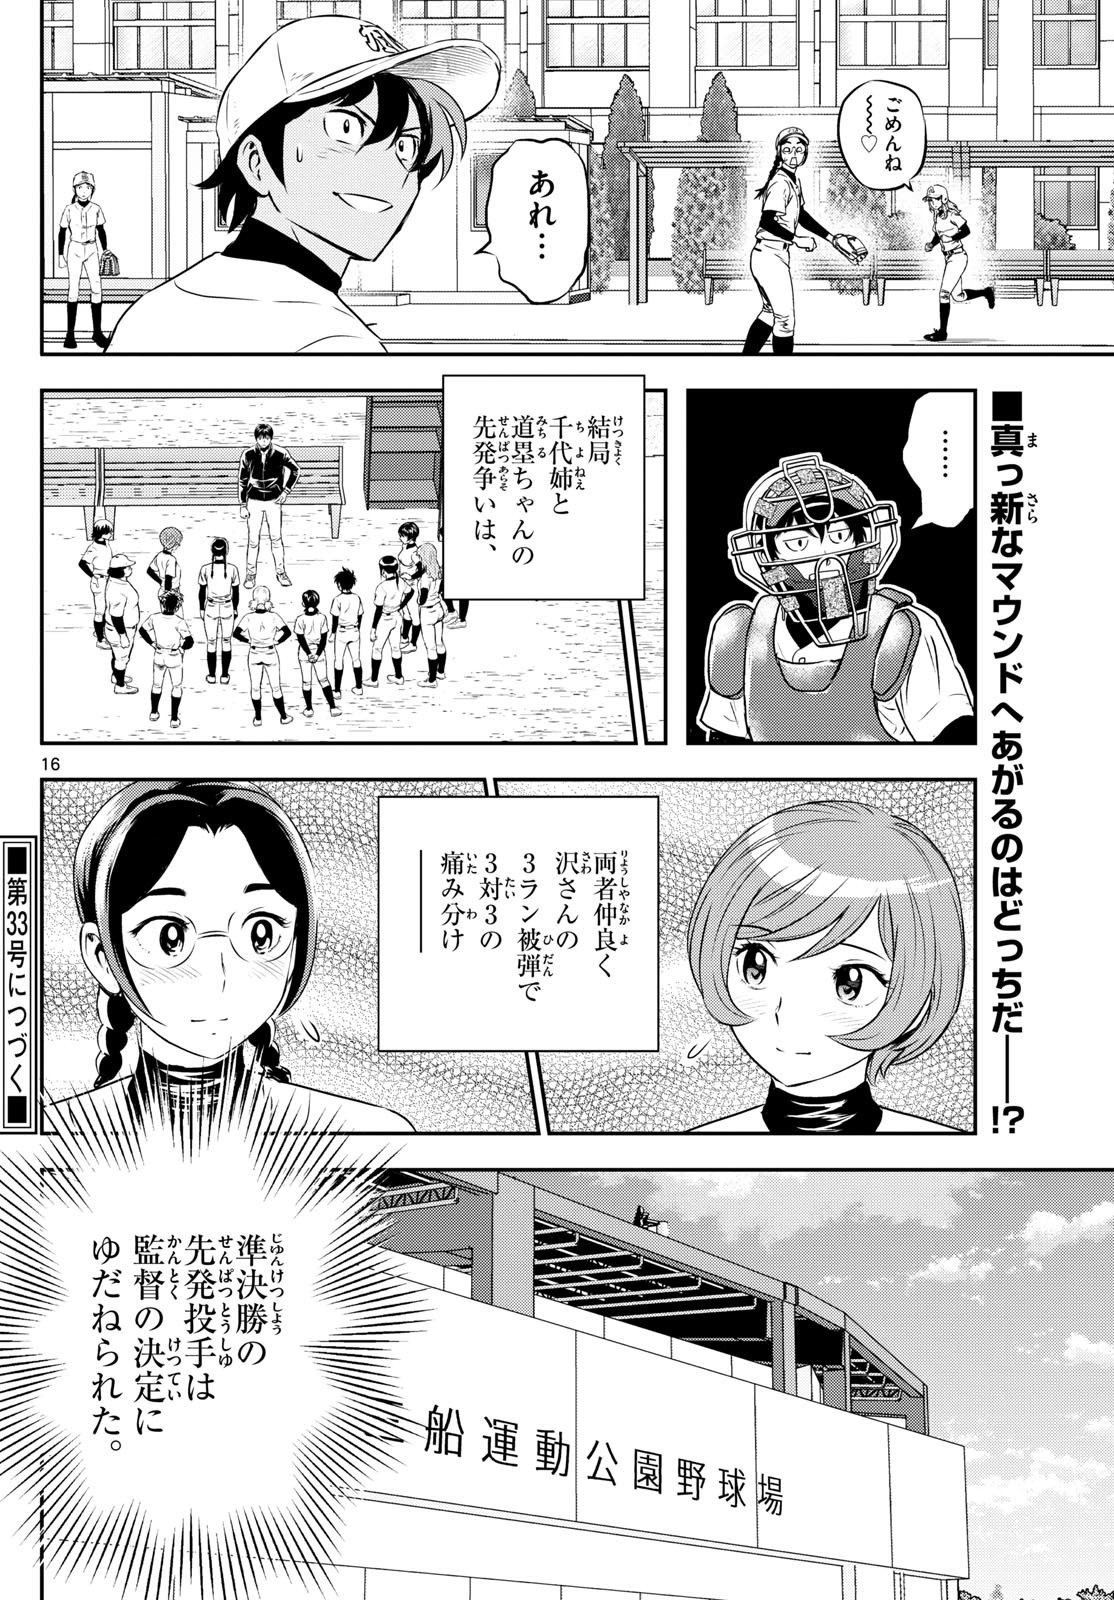 Major 2nd - メジャーセカンド - Chapter 282 - Page 16